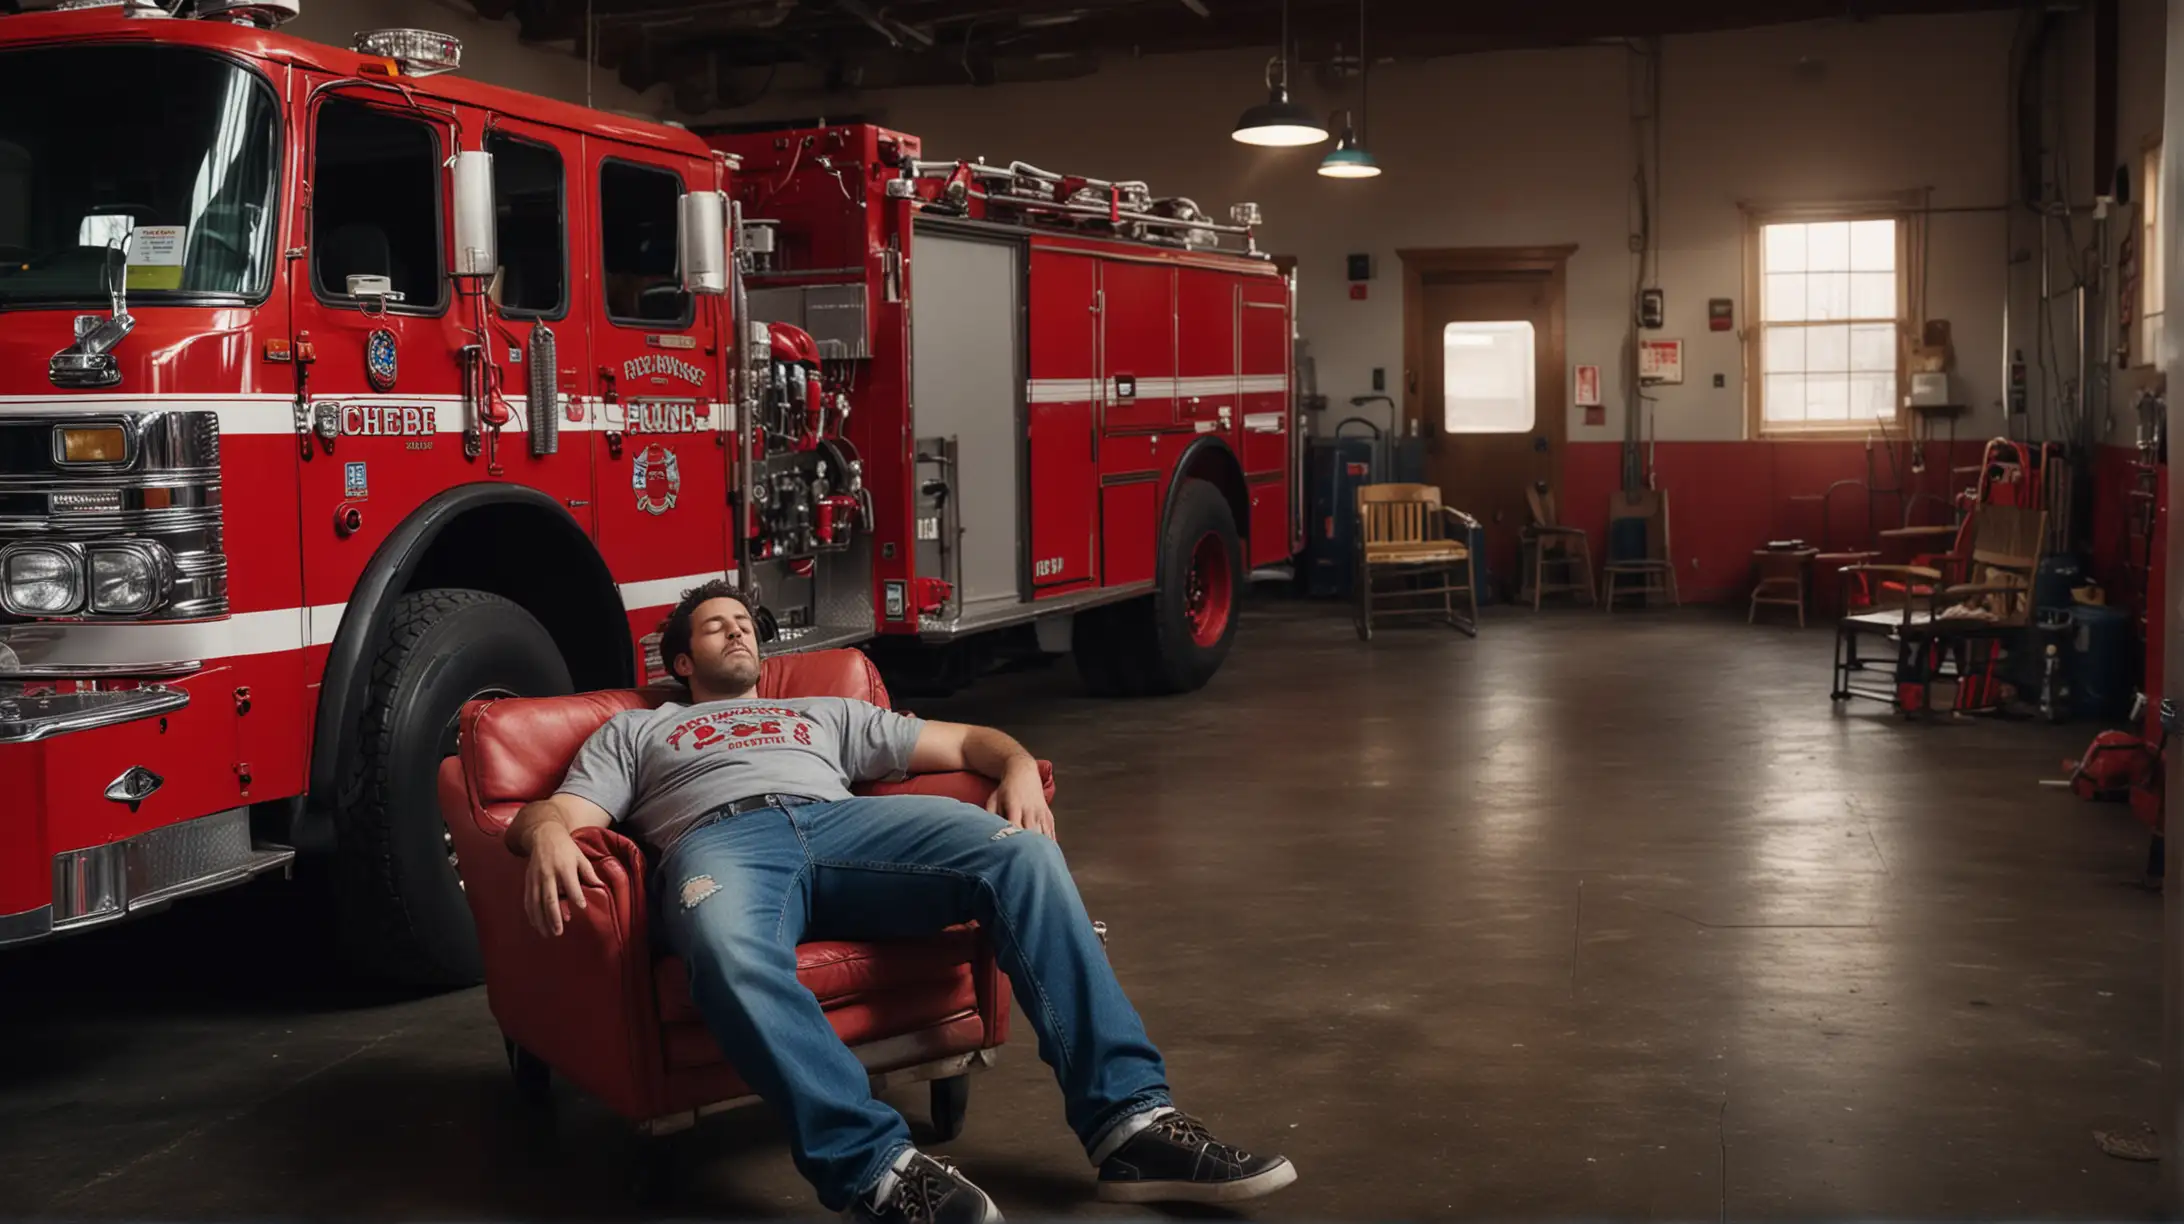 Firehouse Interior with Red Firetruck and Sleeping Man